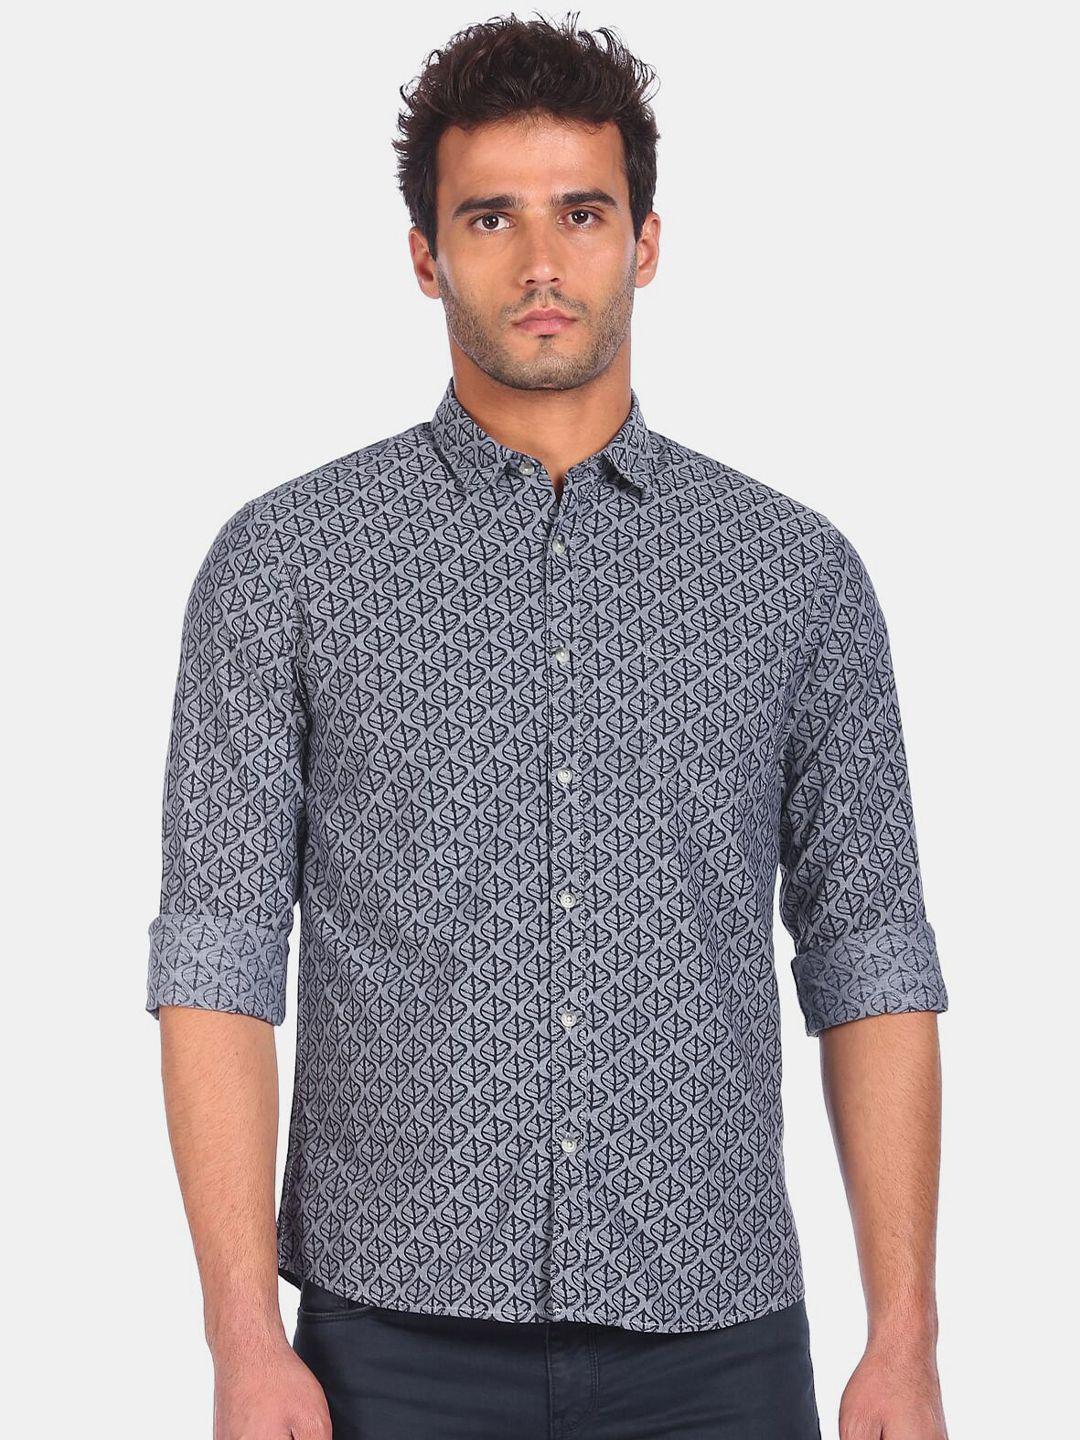 ruggers men grey & black floral printed pure cotton casual shirt